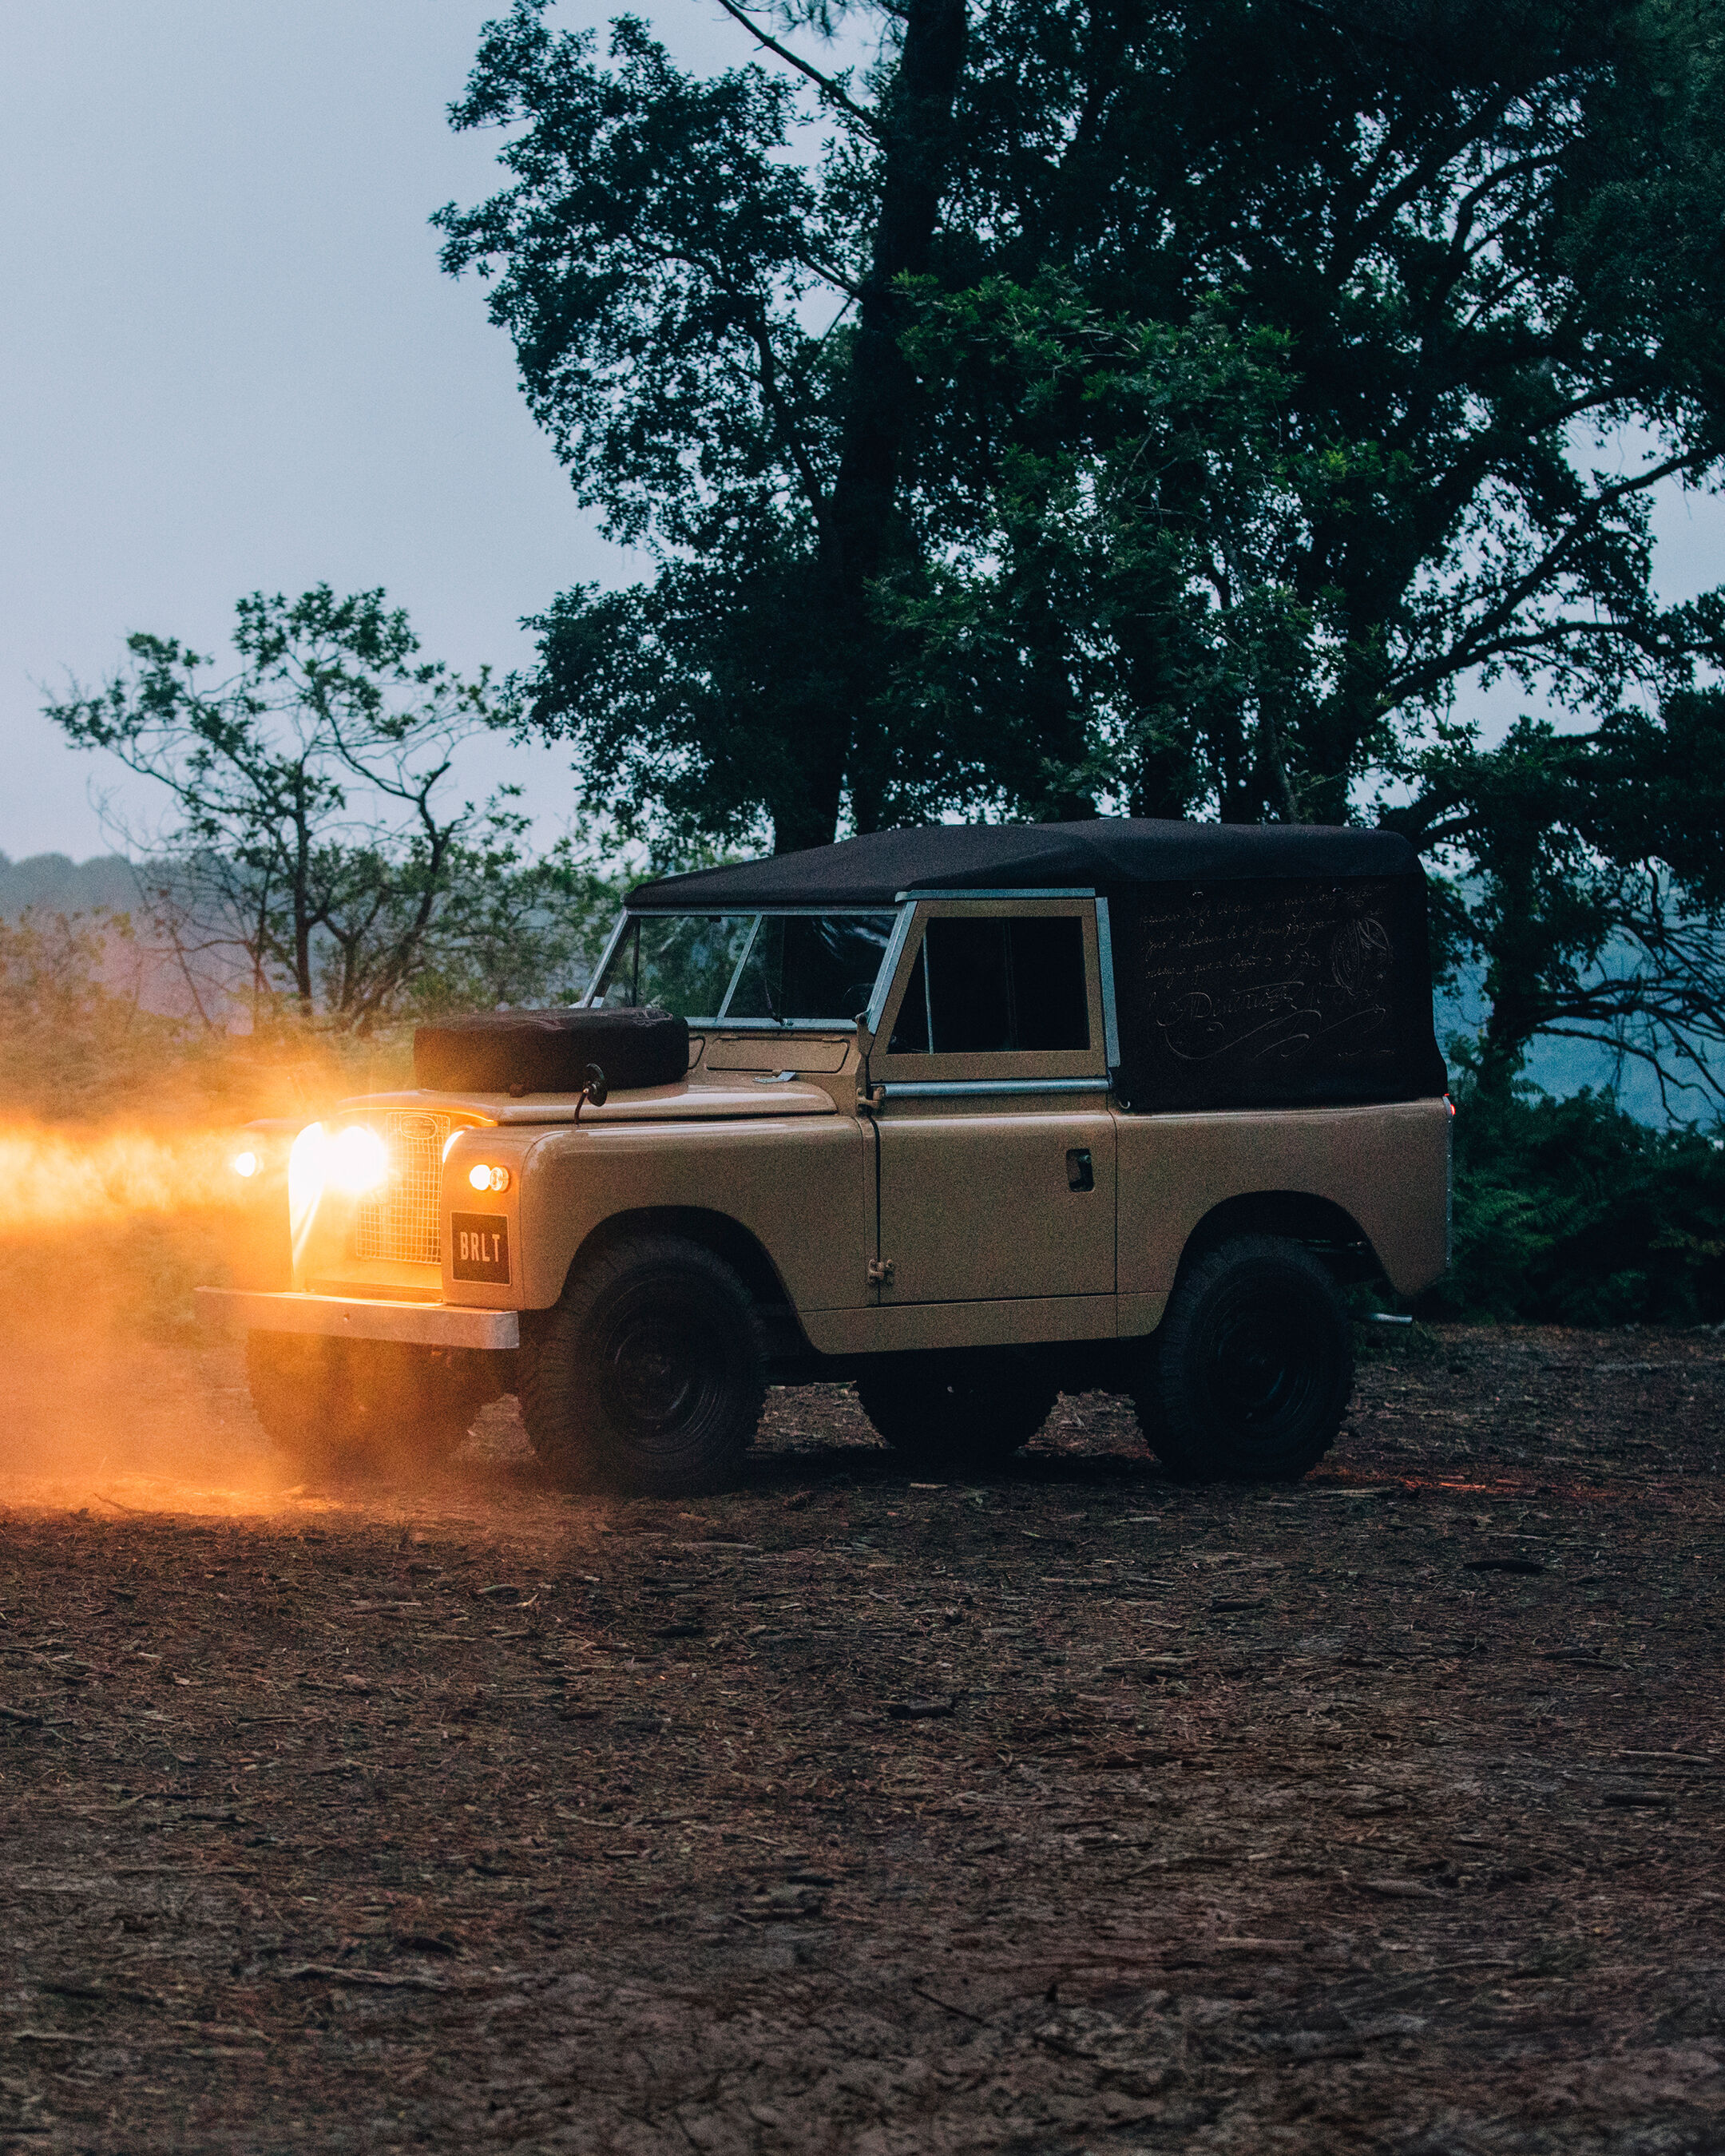 New Product: BERLUTI UNVEILS A NEW EXCEPTIONAL PROJECT WITH A PERSONALIZED LAND ROVER